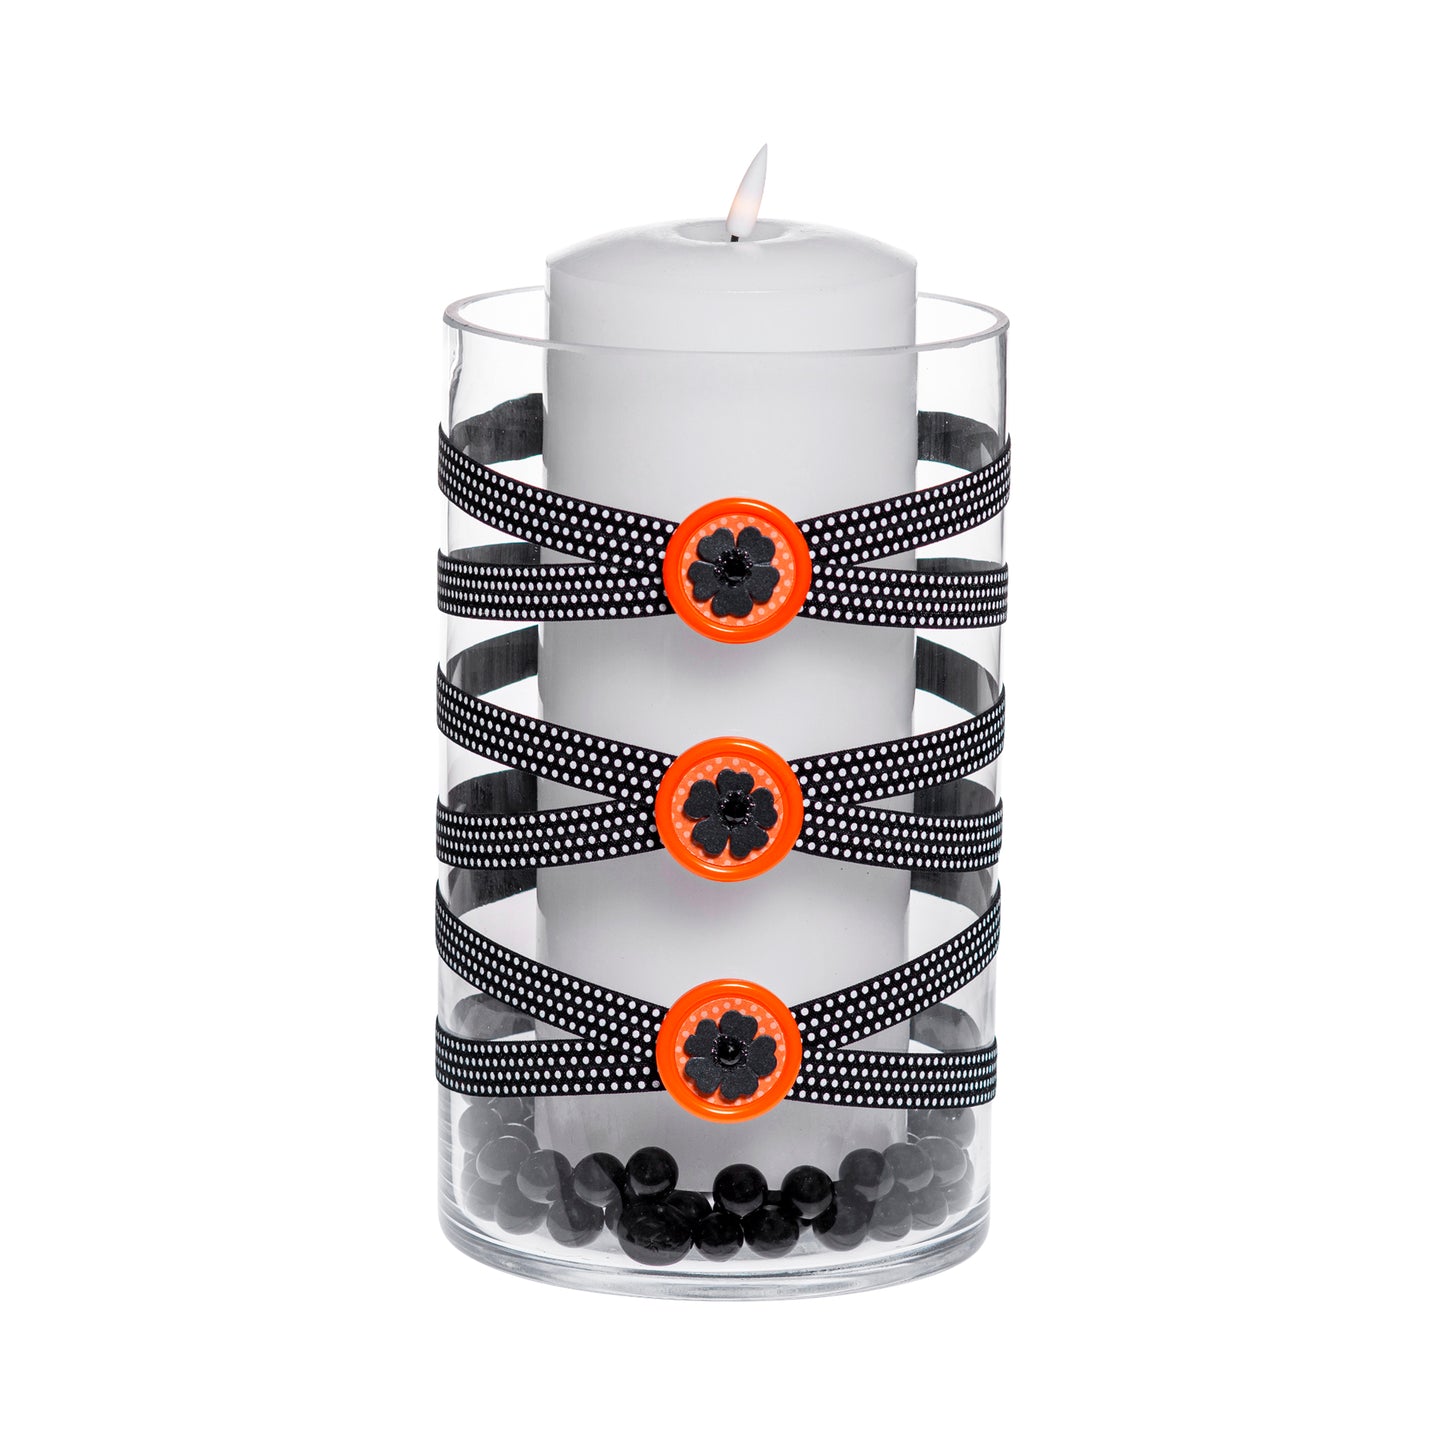 6" x 10" Cylinder Black White Polka Dot 5X 5 Orange Black Paper Flowers Halloween-ish Fall-O-Ween Collection Complete Set